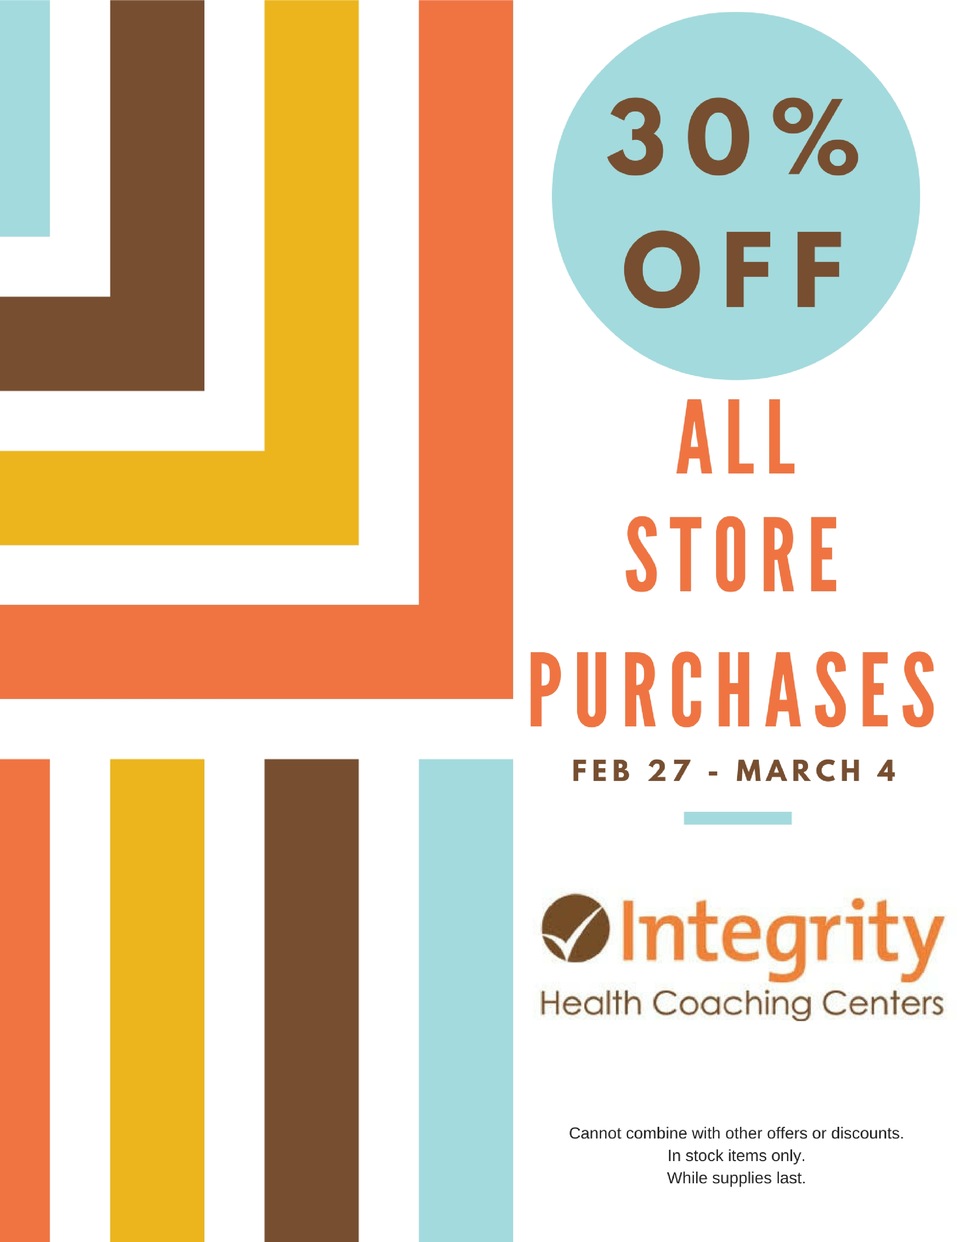 Store Special Feb 27 - March 4 at Integrity Health Coaching Centers in NH!